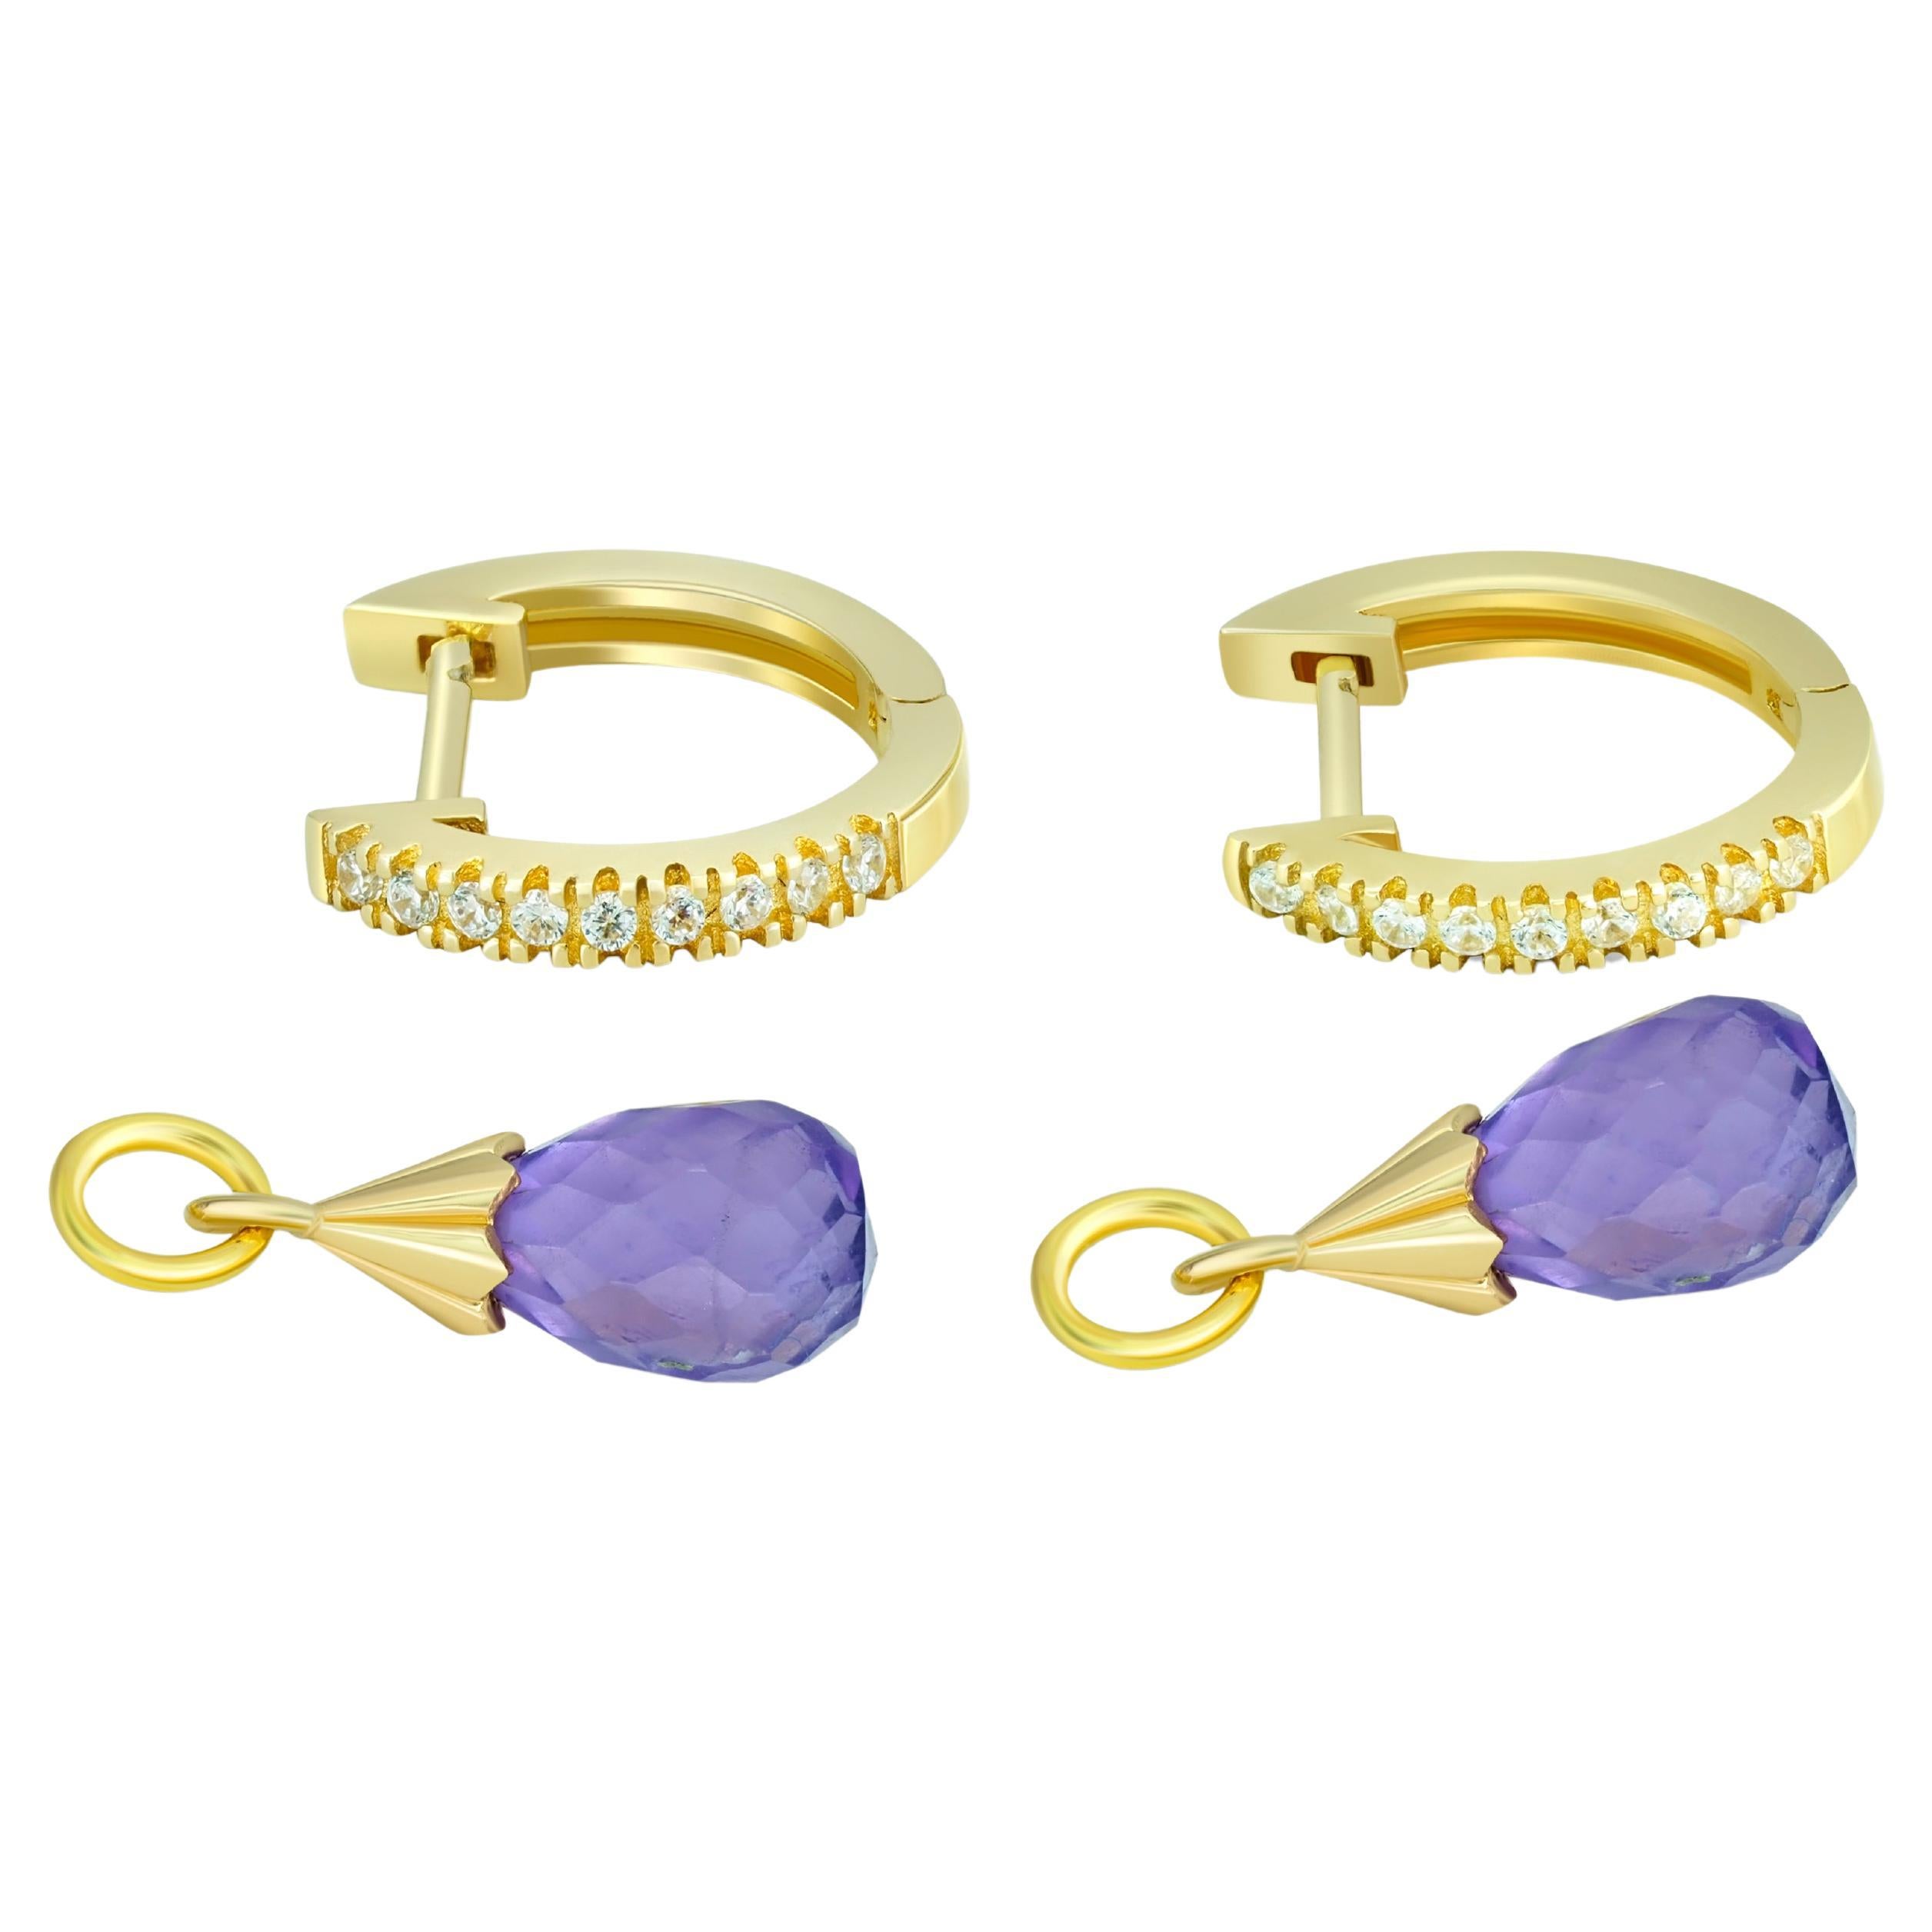 Diamond Hoop Earrings and Amethyst Briolette Charms in 14k Gold.  For Sale